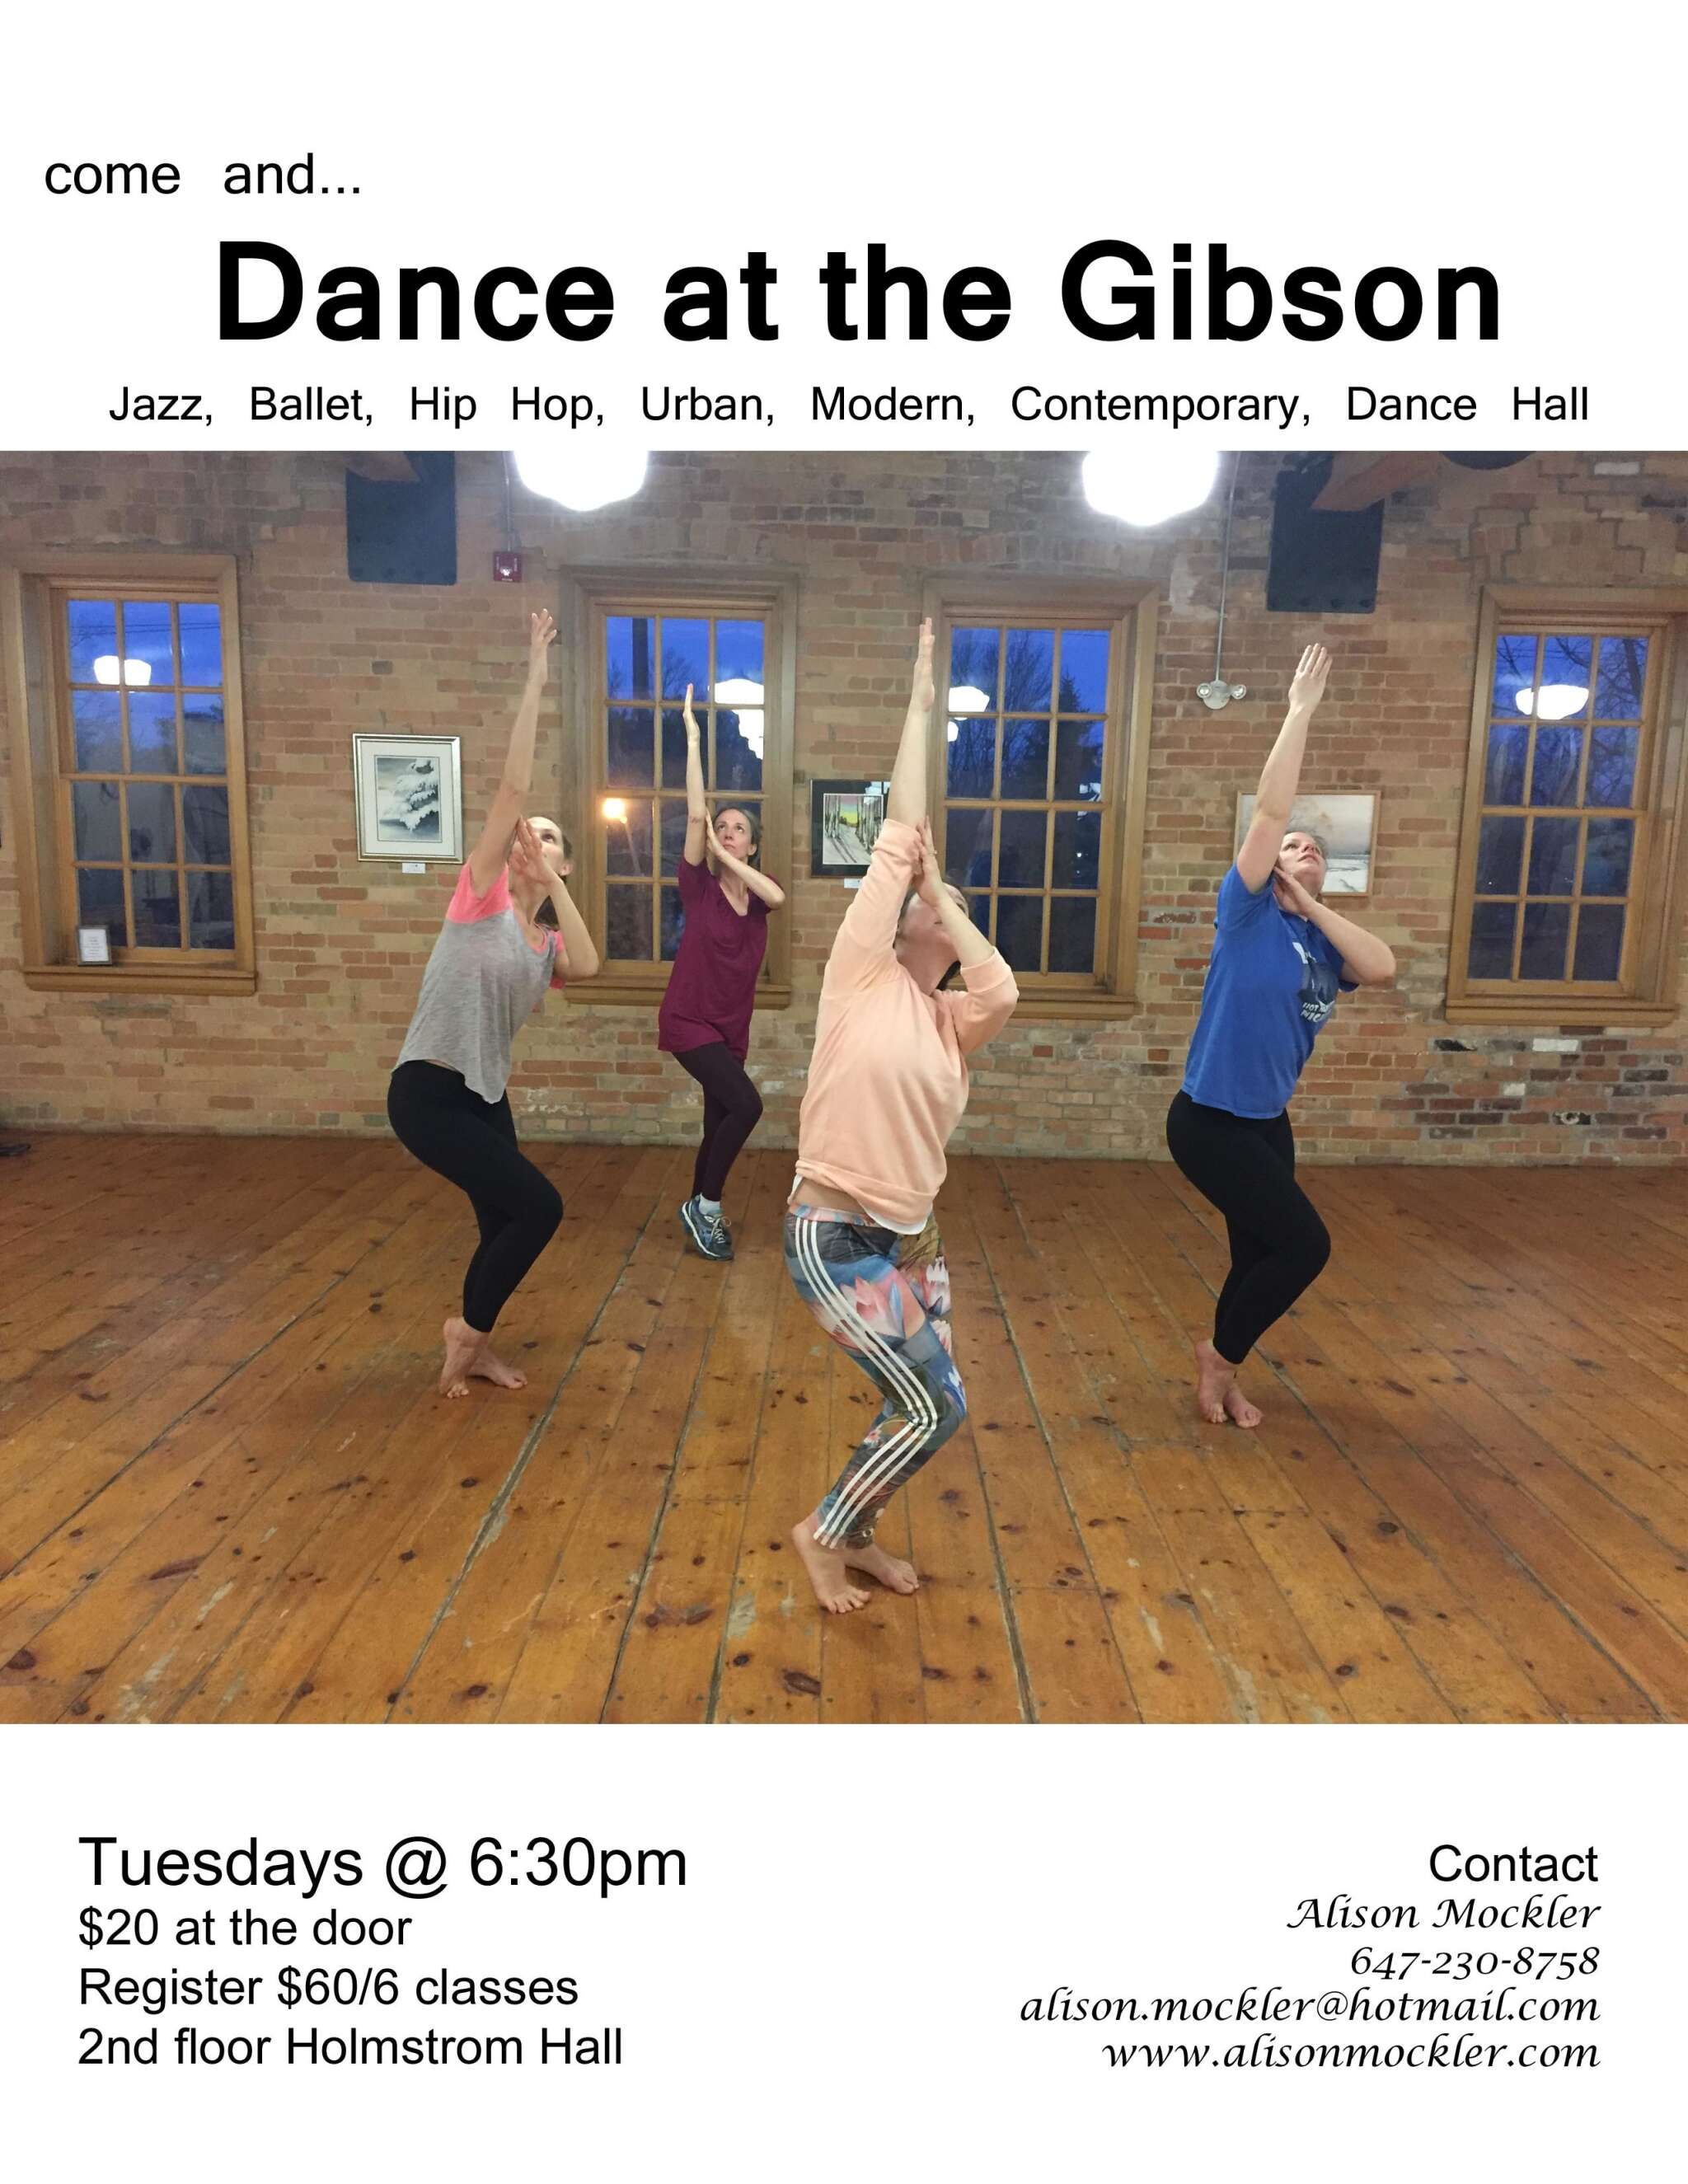 Come and Dance at the Gibson